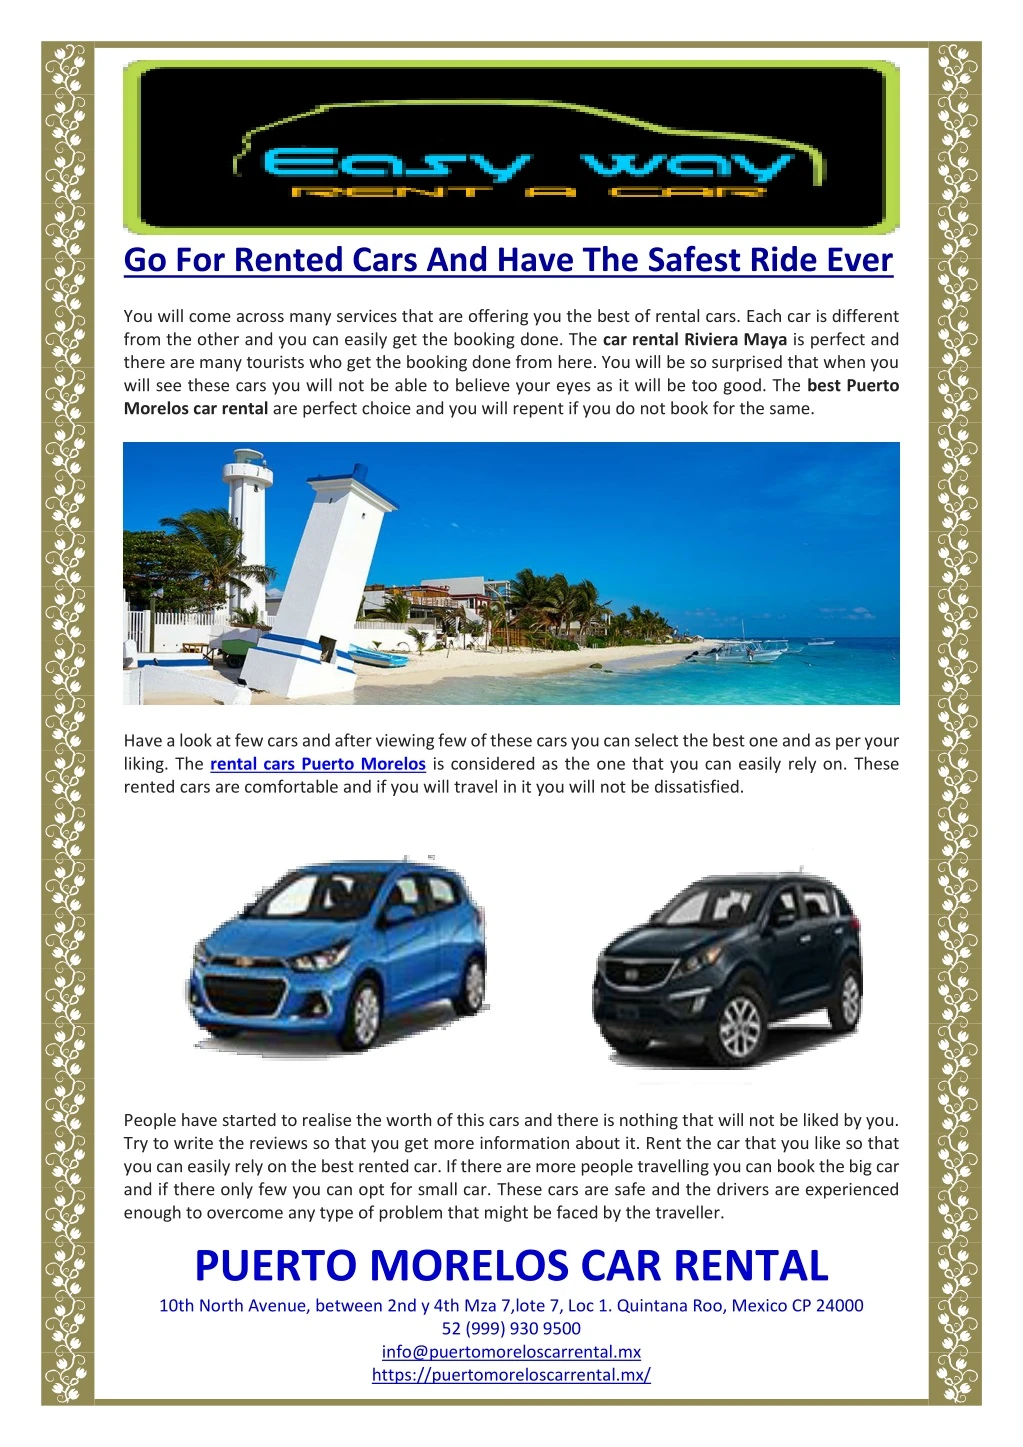 go for rented cars and have the safest ride ever